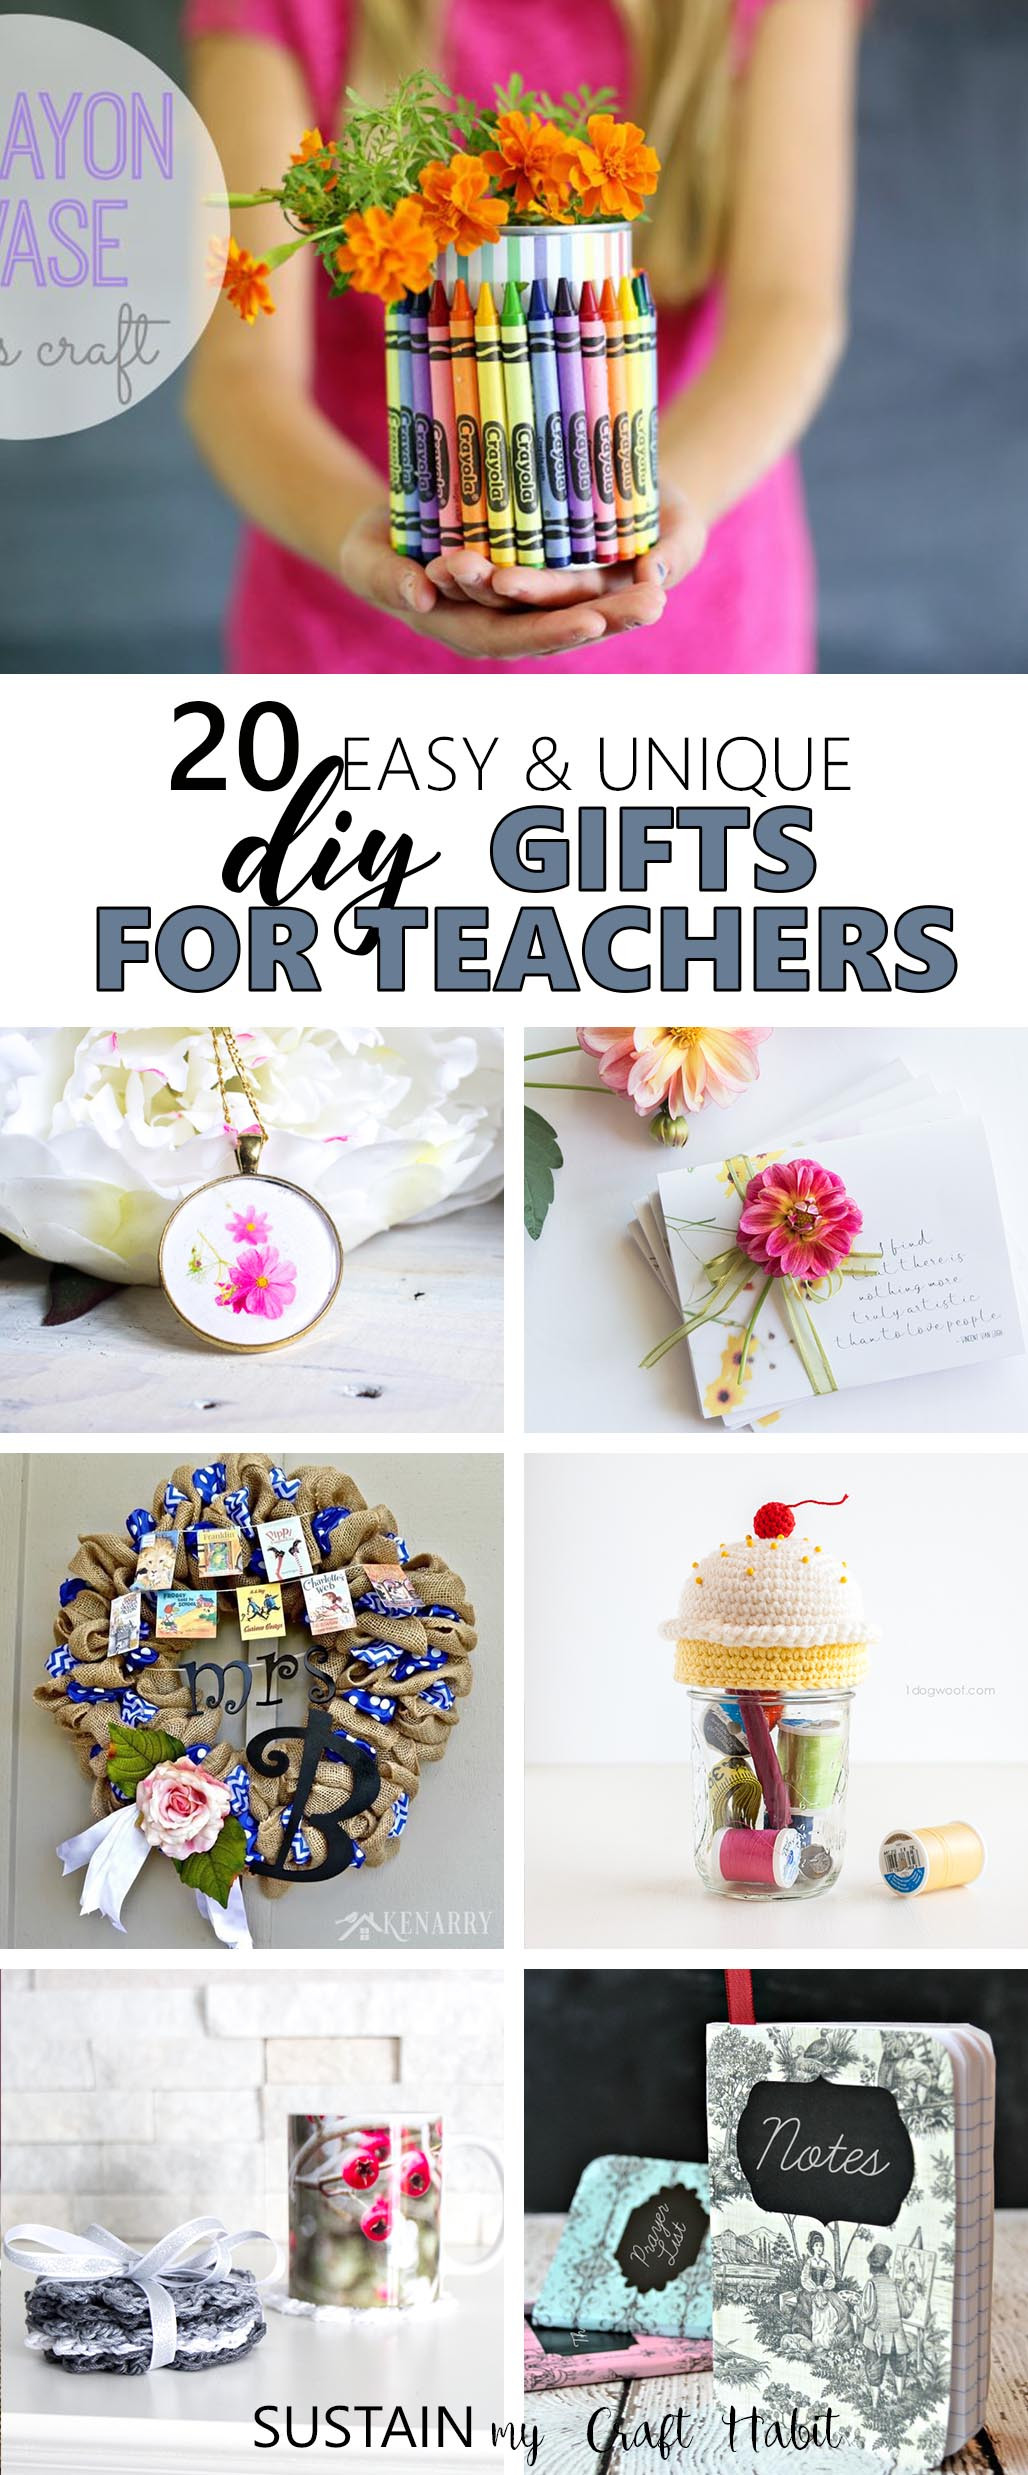 Unique DIY Gifts
 Gifts for Teachers 20 Easy and Unique DIY Presents you